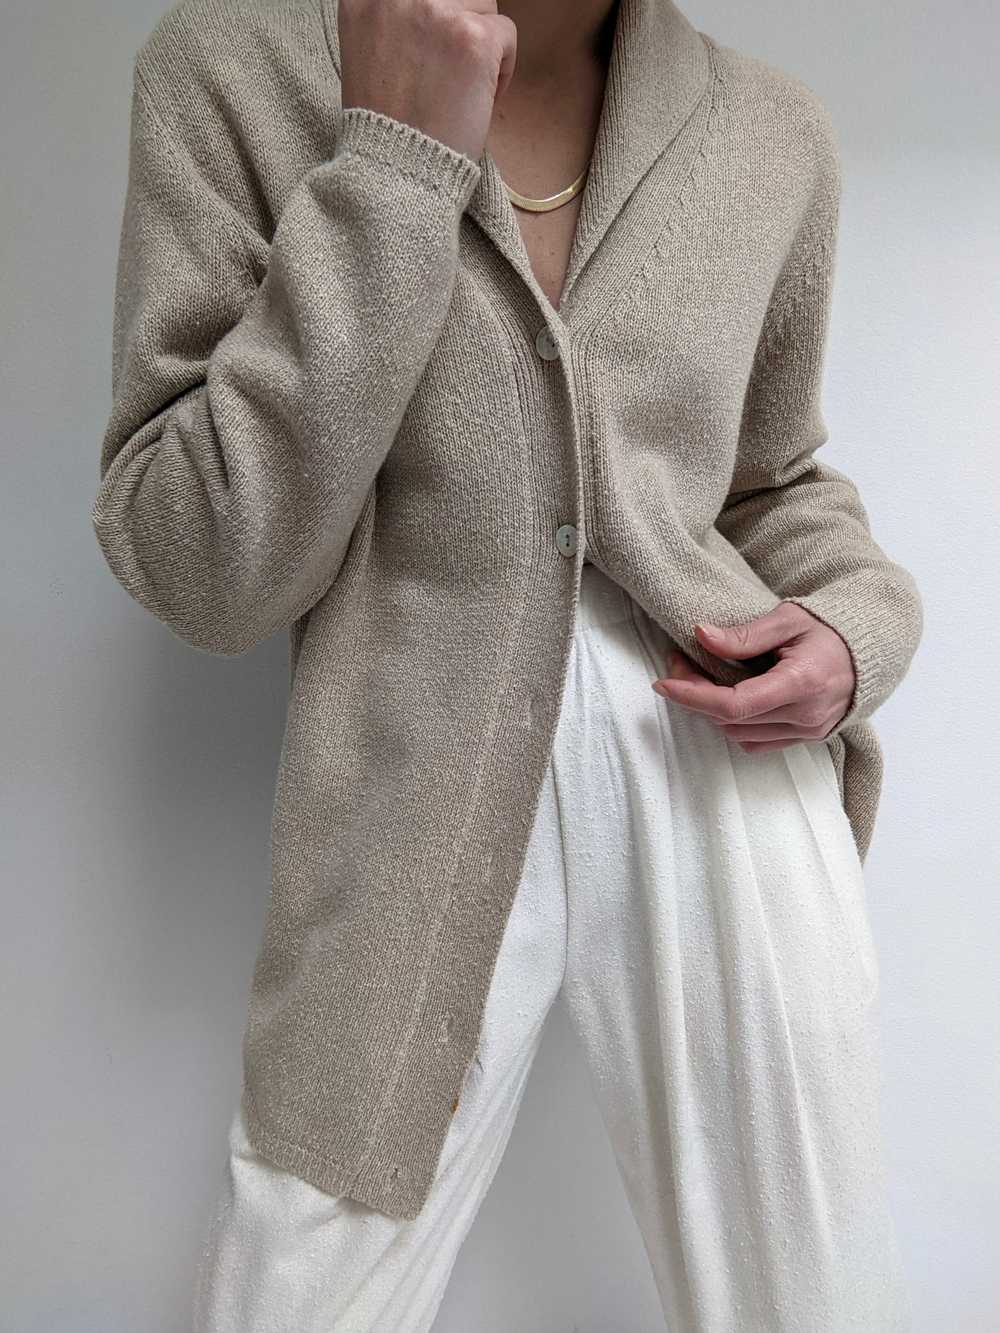 Vintage Fawn Collared Cardigan - image 1